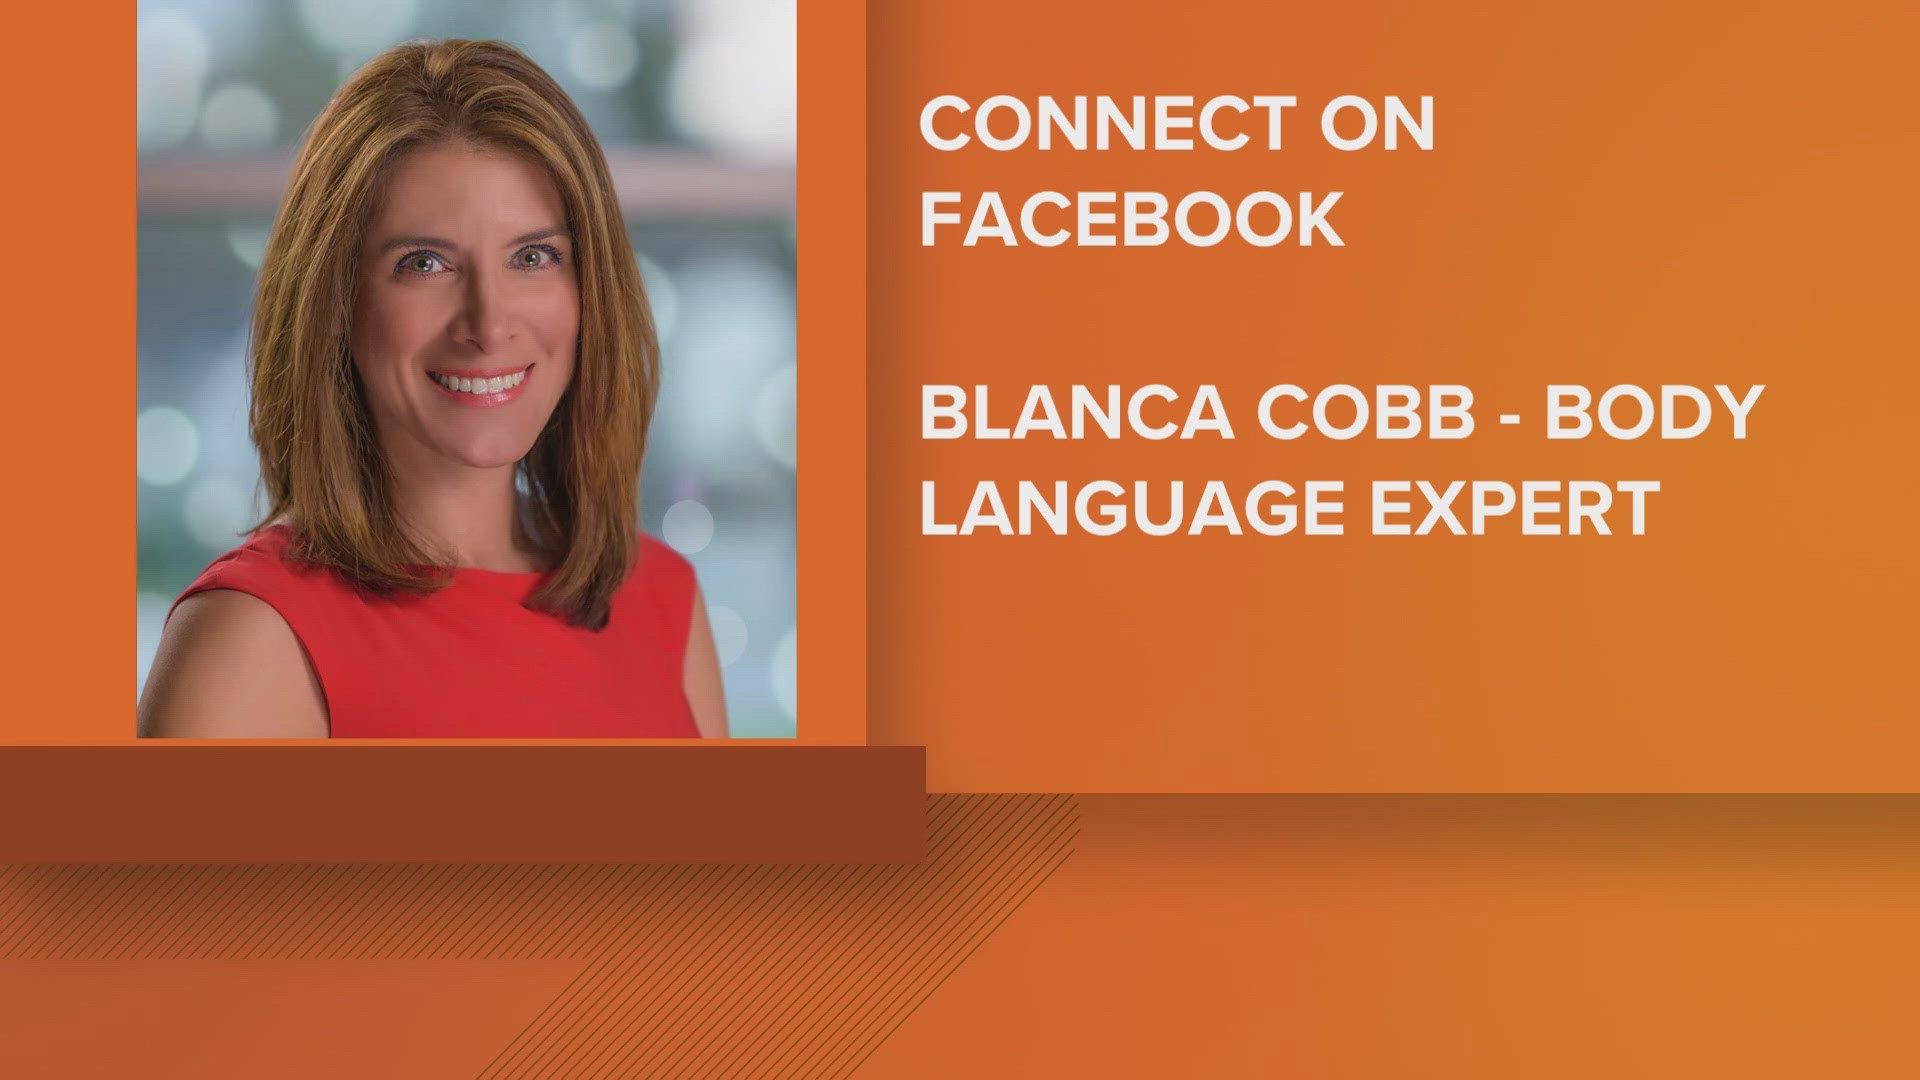 Blanca Cobb explains why letting go of certain things can help our mental and physical well-being.